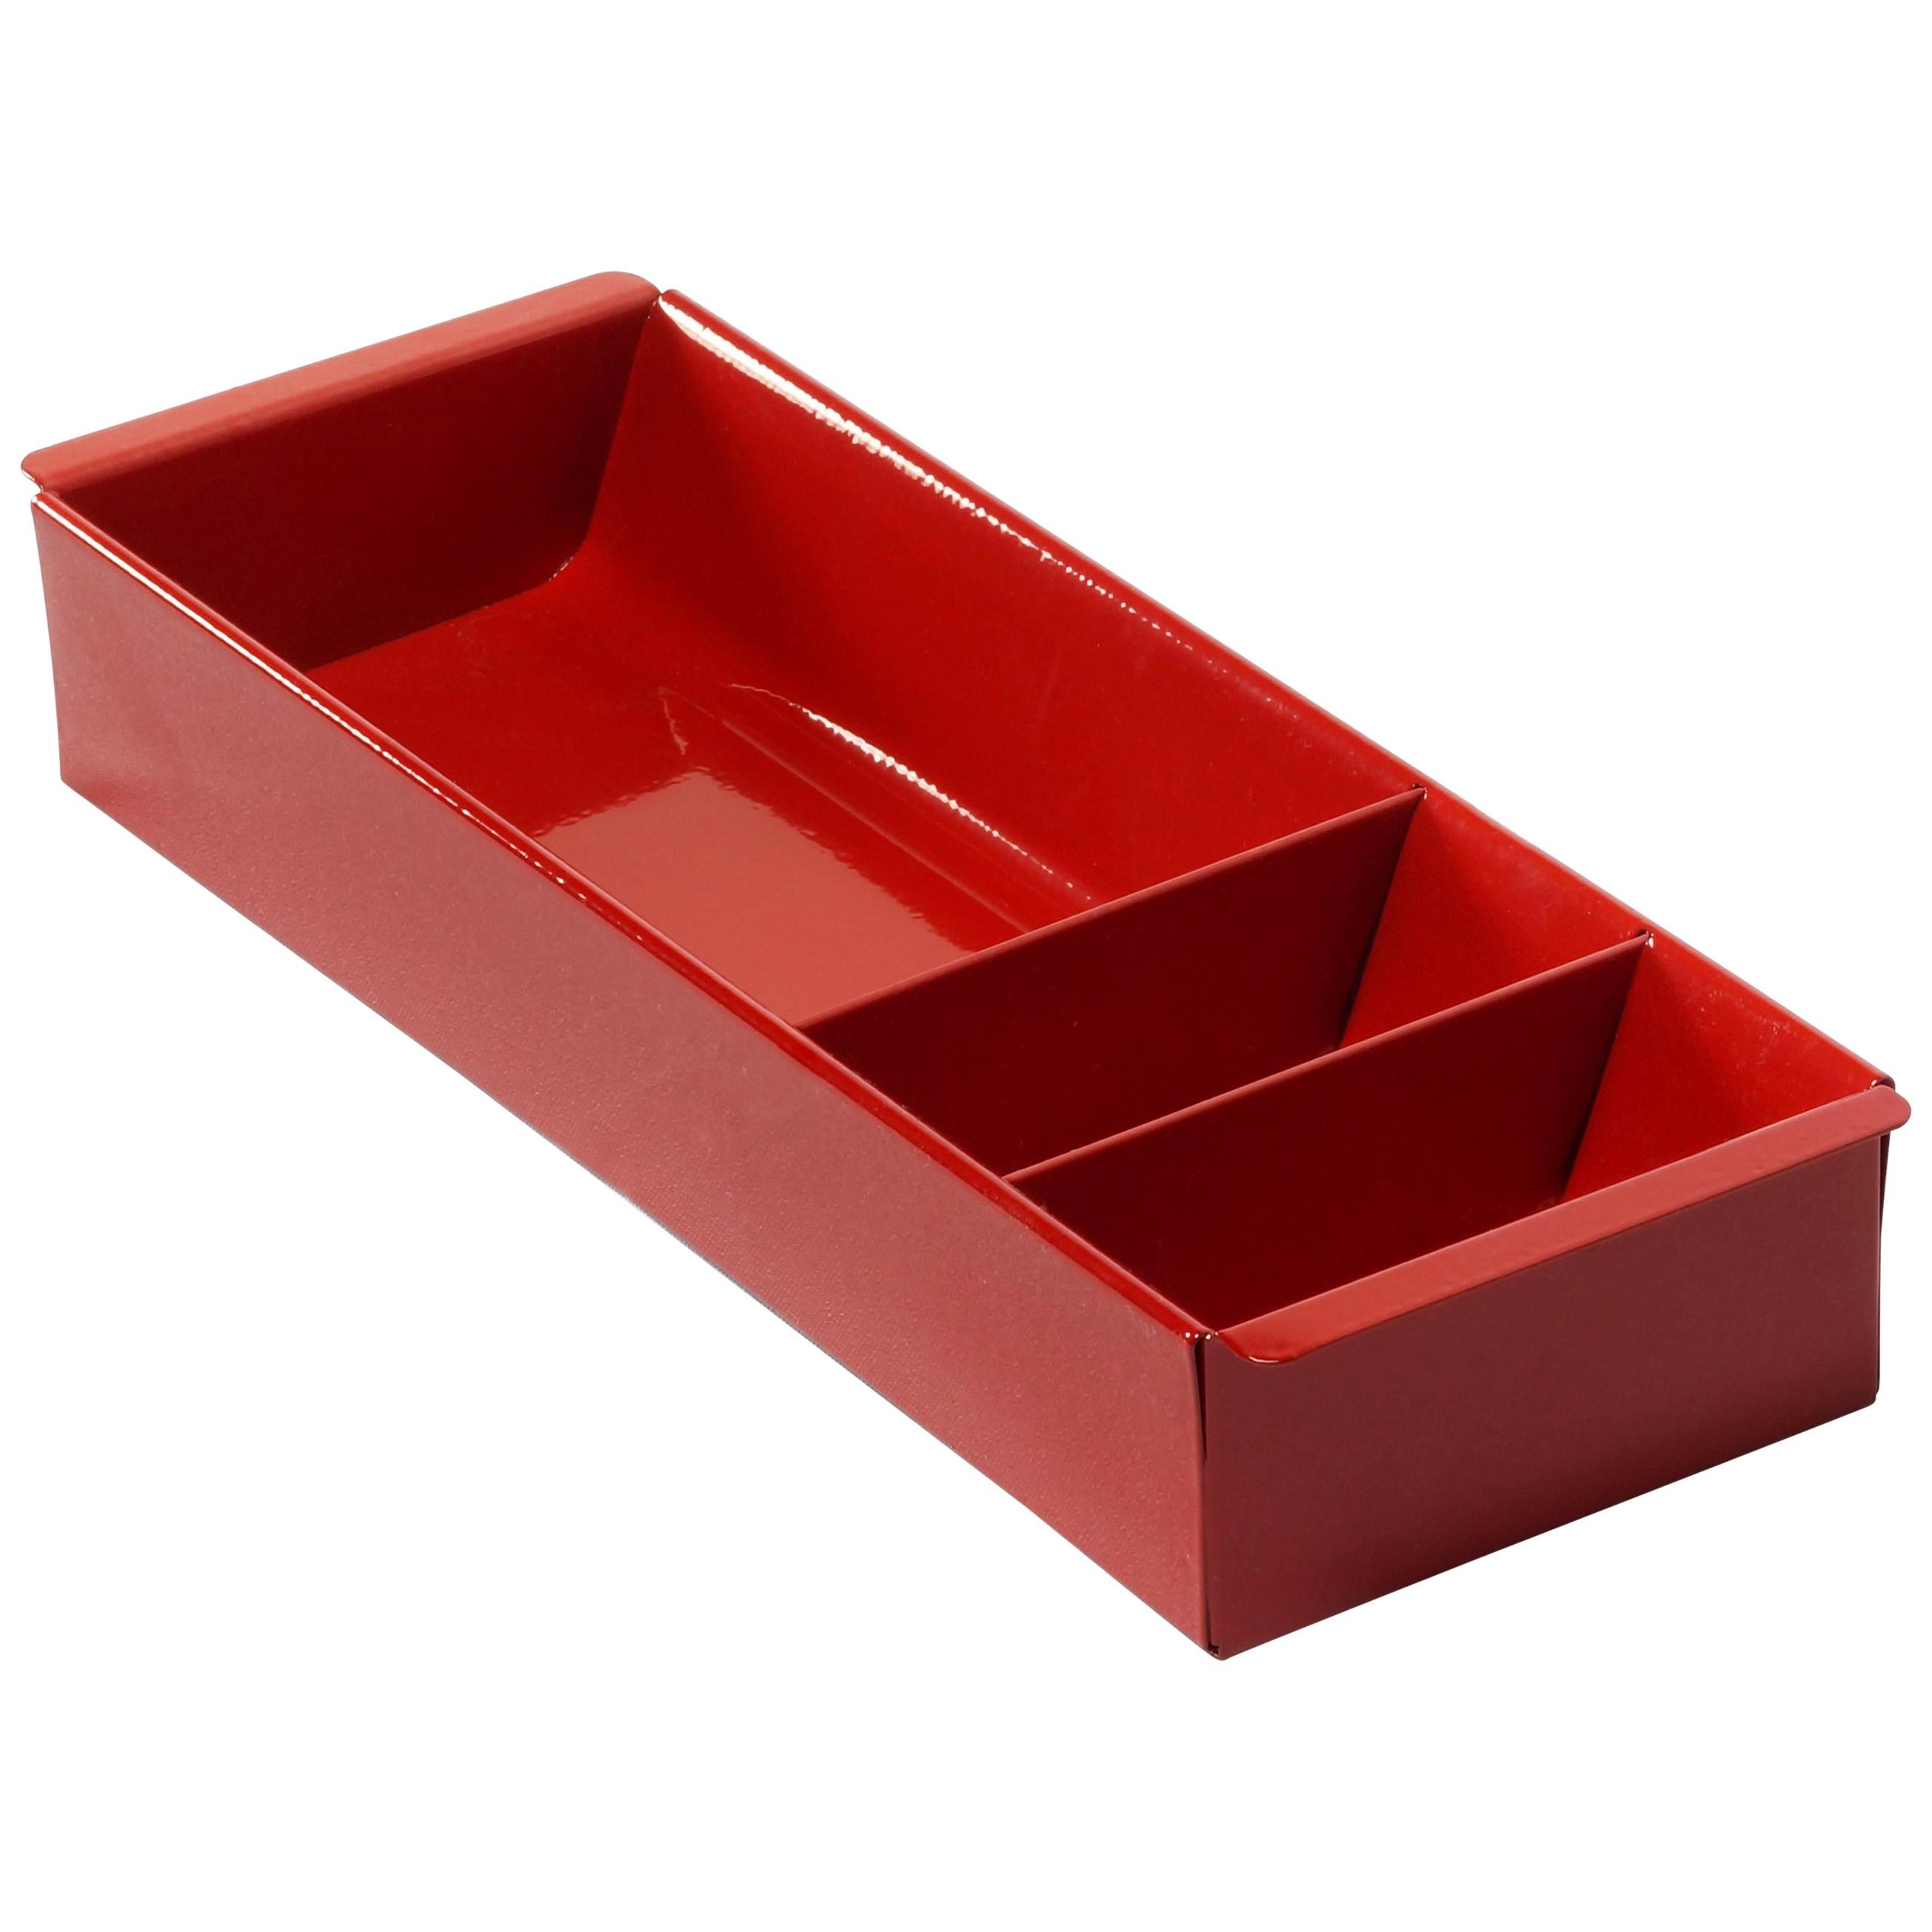 Steel Tanker Drawer Insert Repurposed as Organizer, Refinished in Ruby Red